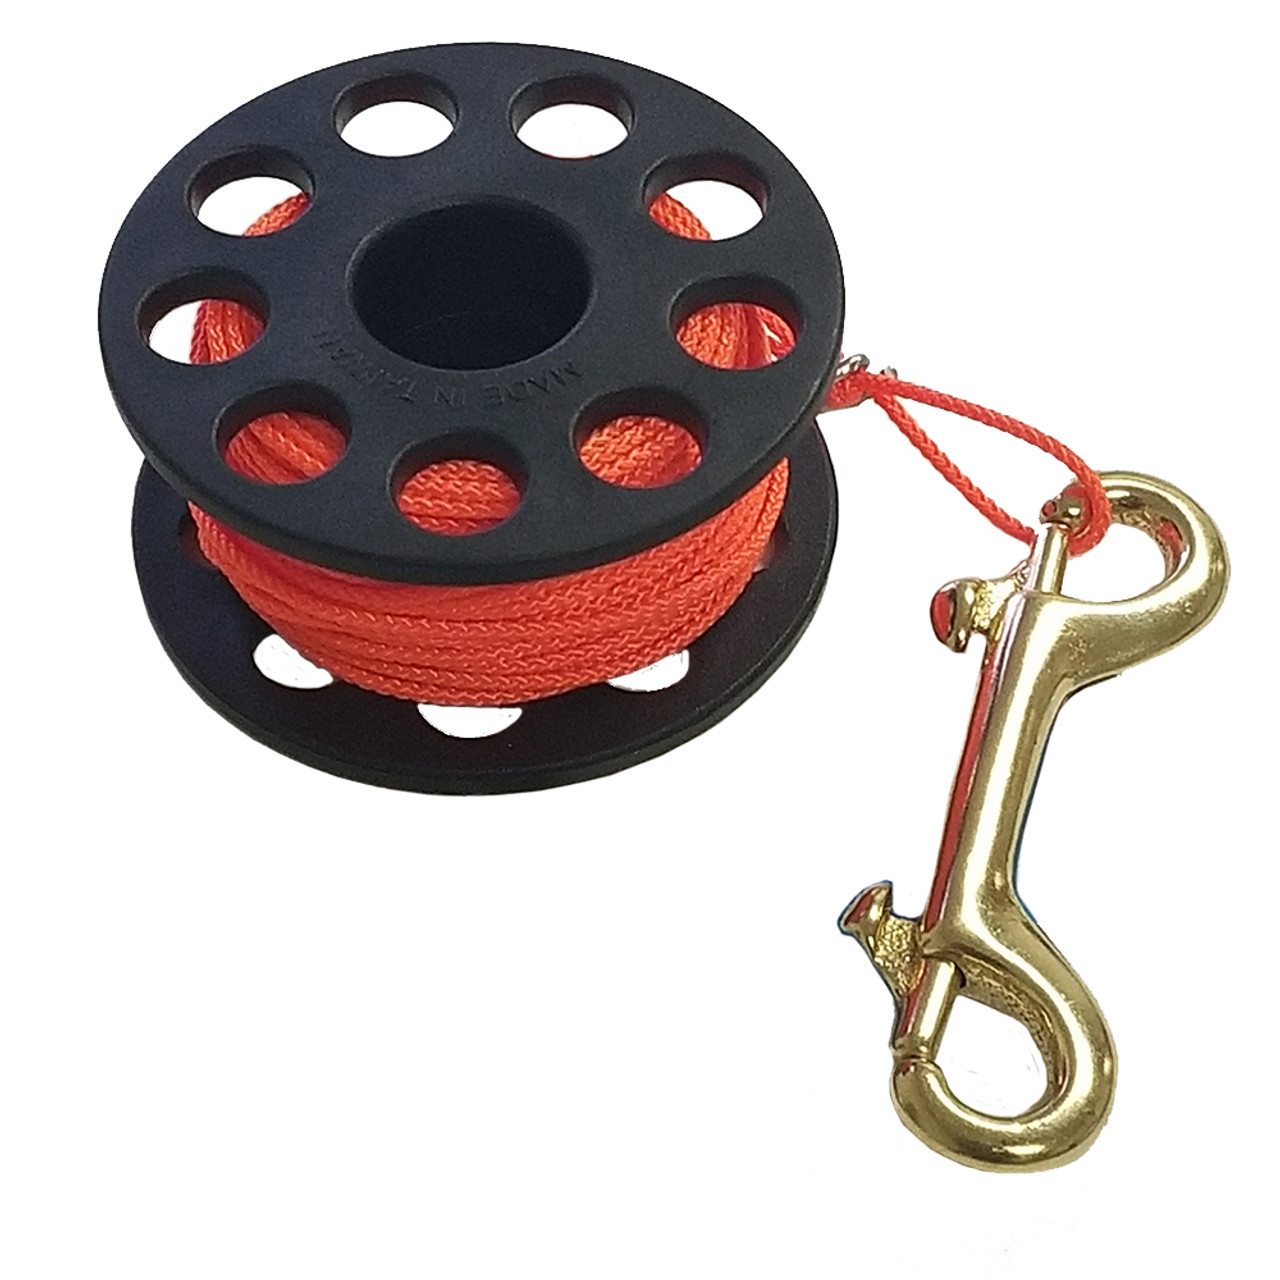 3" Finger Spool with 100FT. #24 Orange Braided Polyester Dacron Reel Line and 4" Double End Marine Grade Brass Bolt Snap